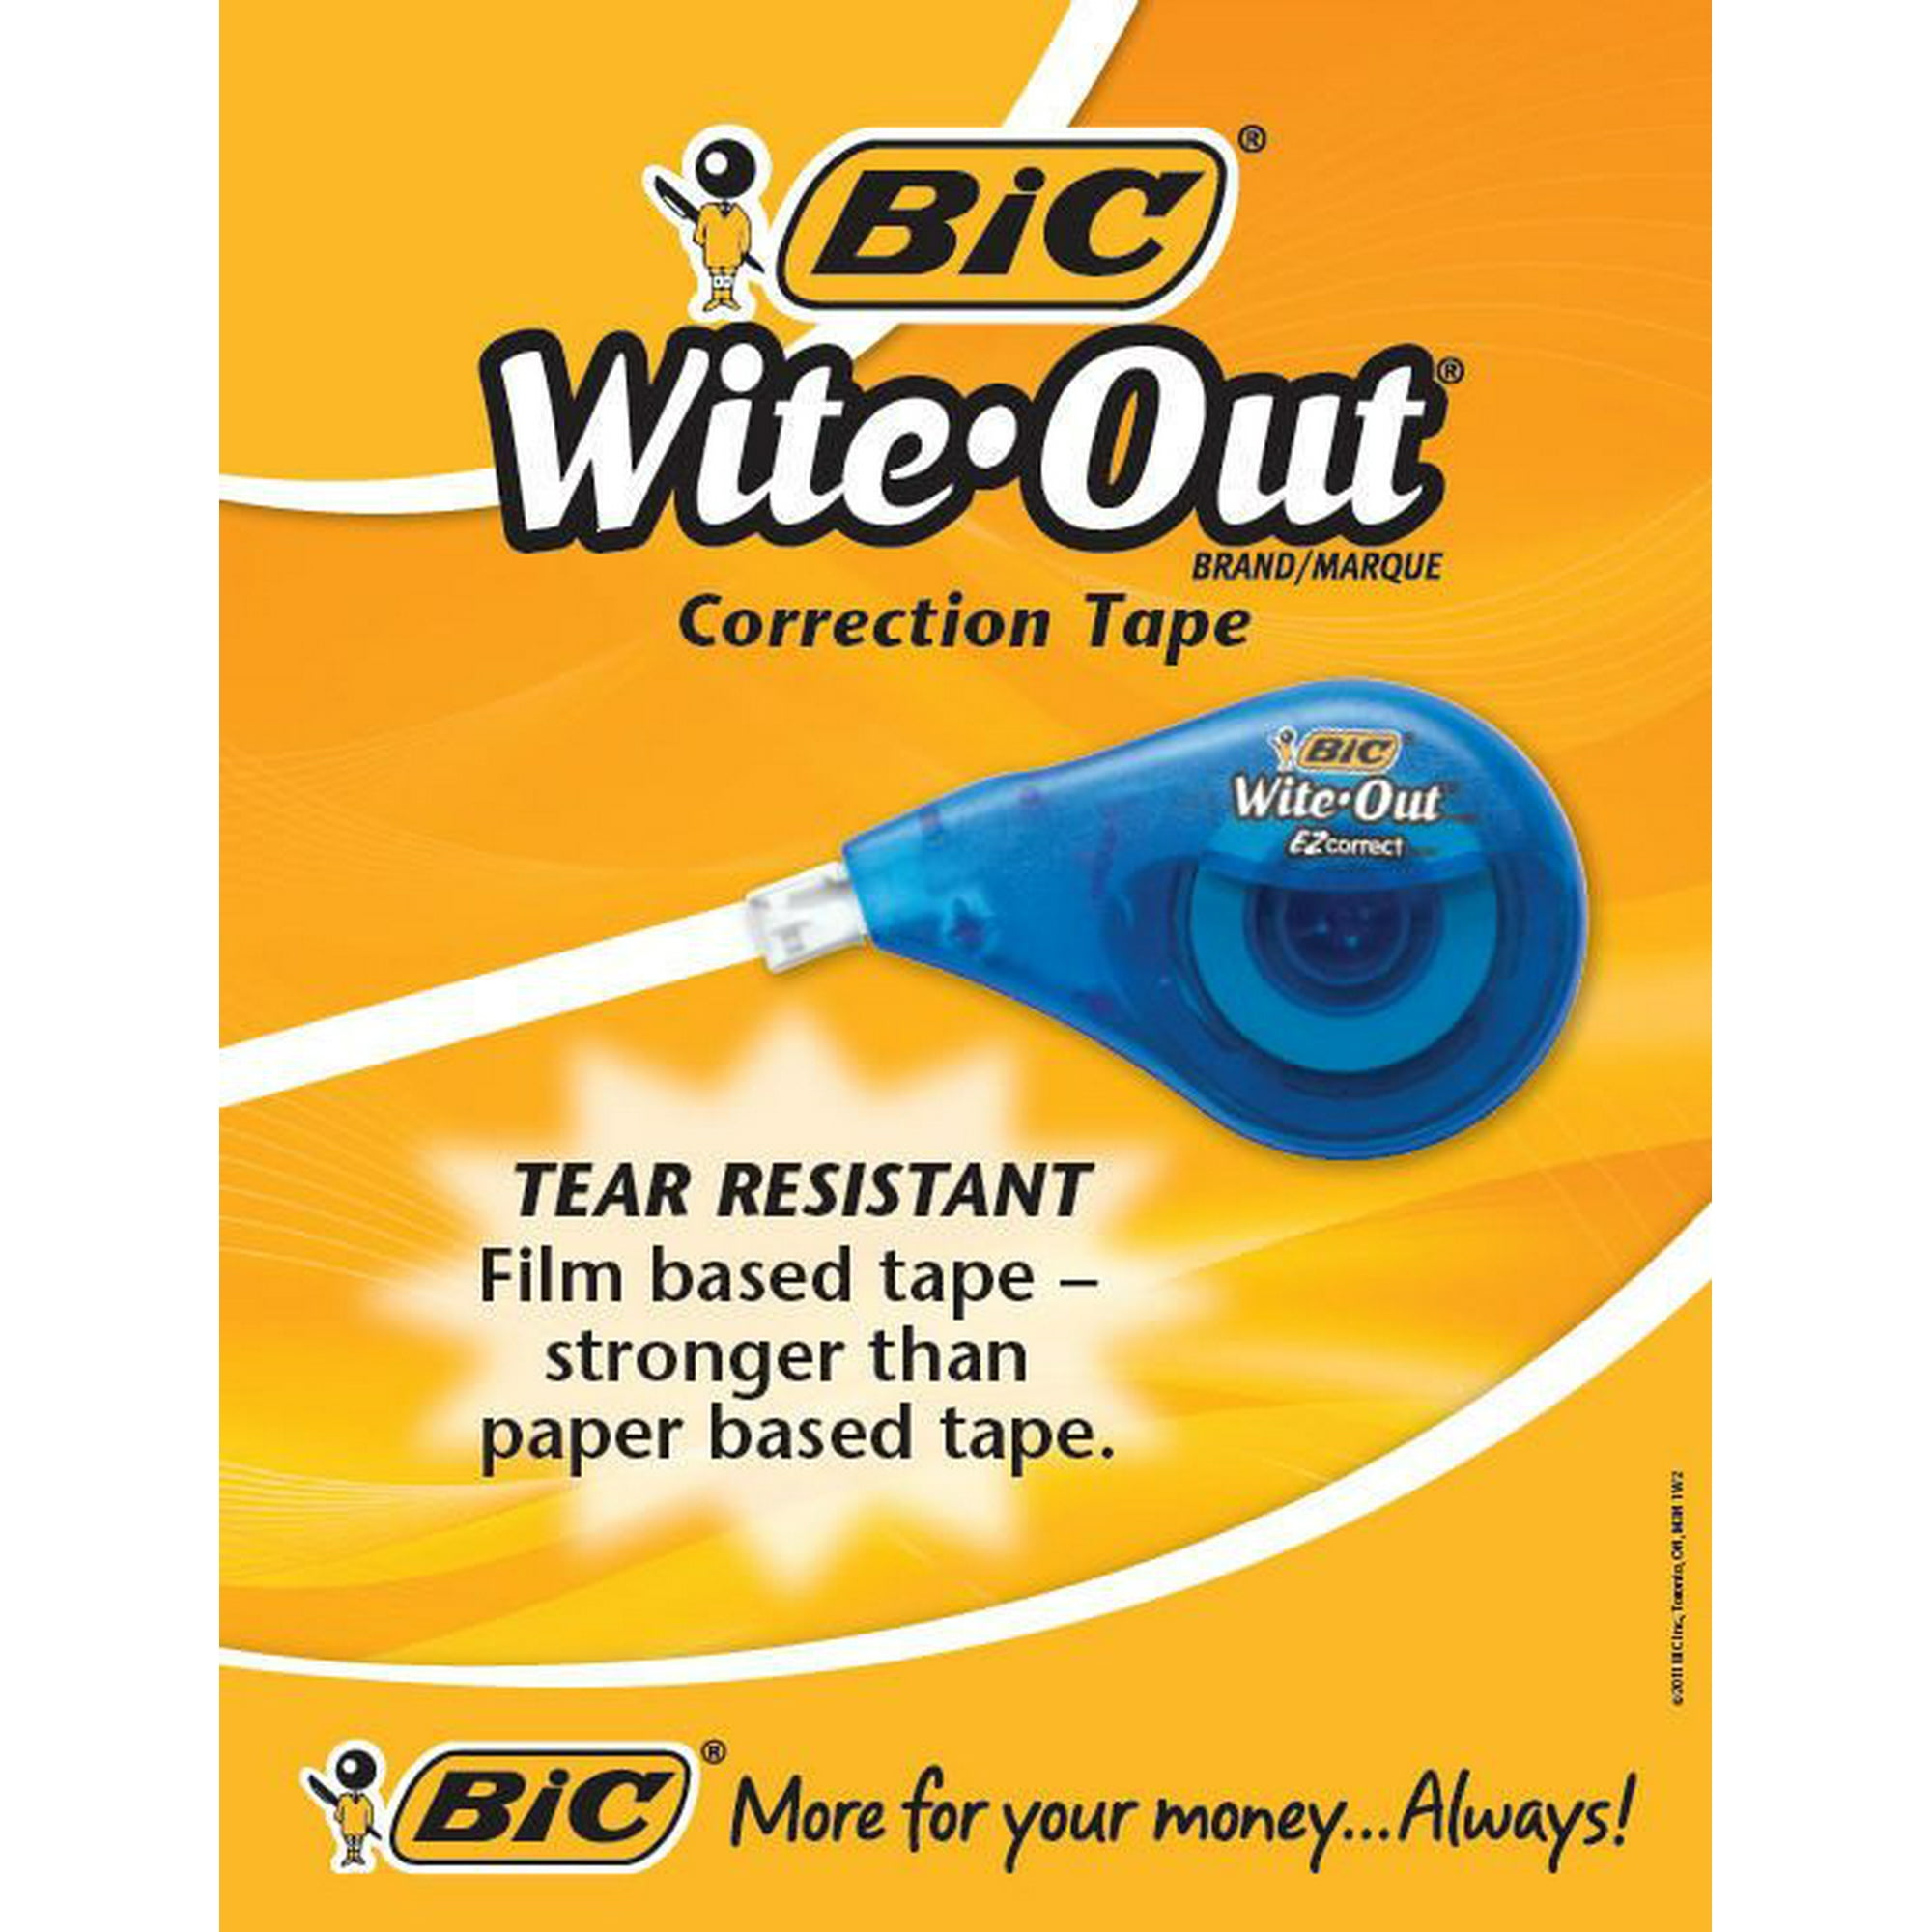 Correction Tape For Instant Corrections Pack Of 6 Tapes | White Out Writing  Correction Tape For School and Office